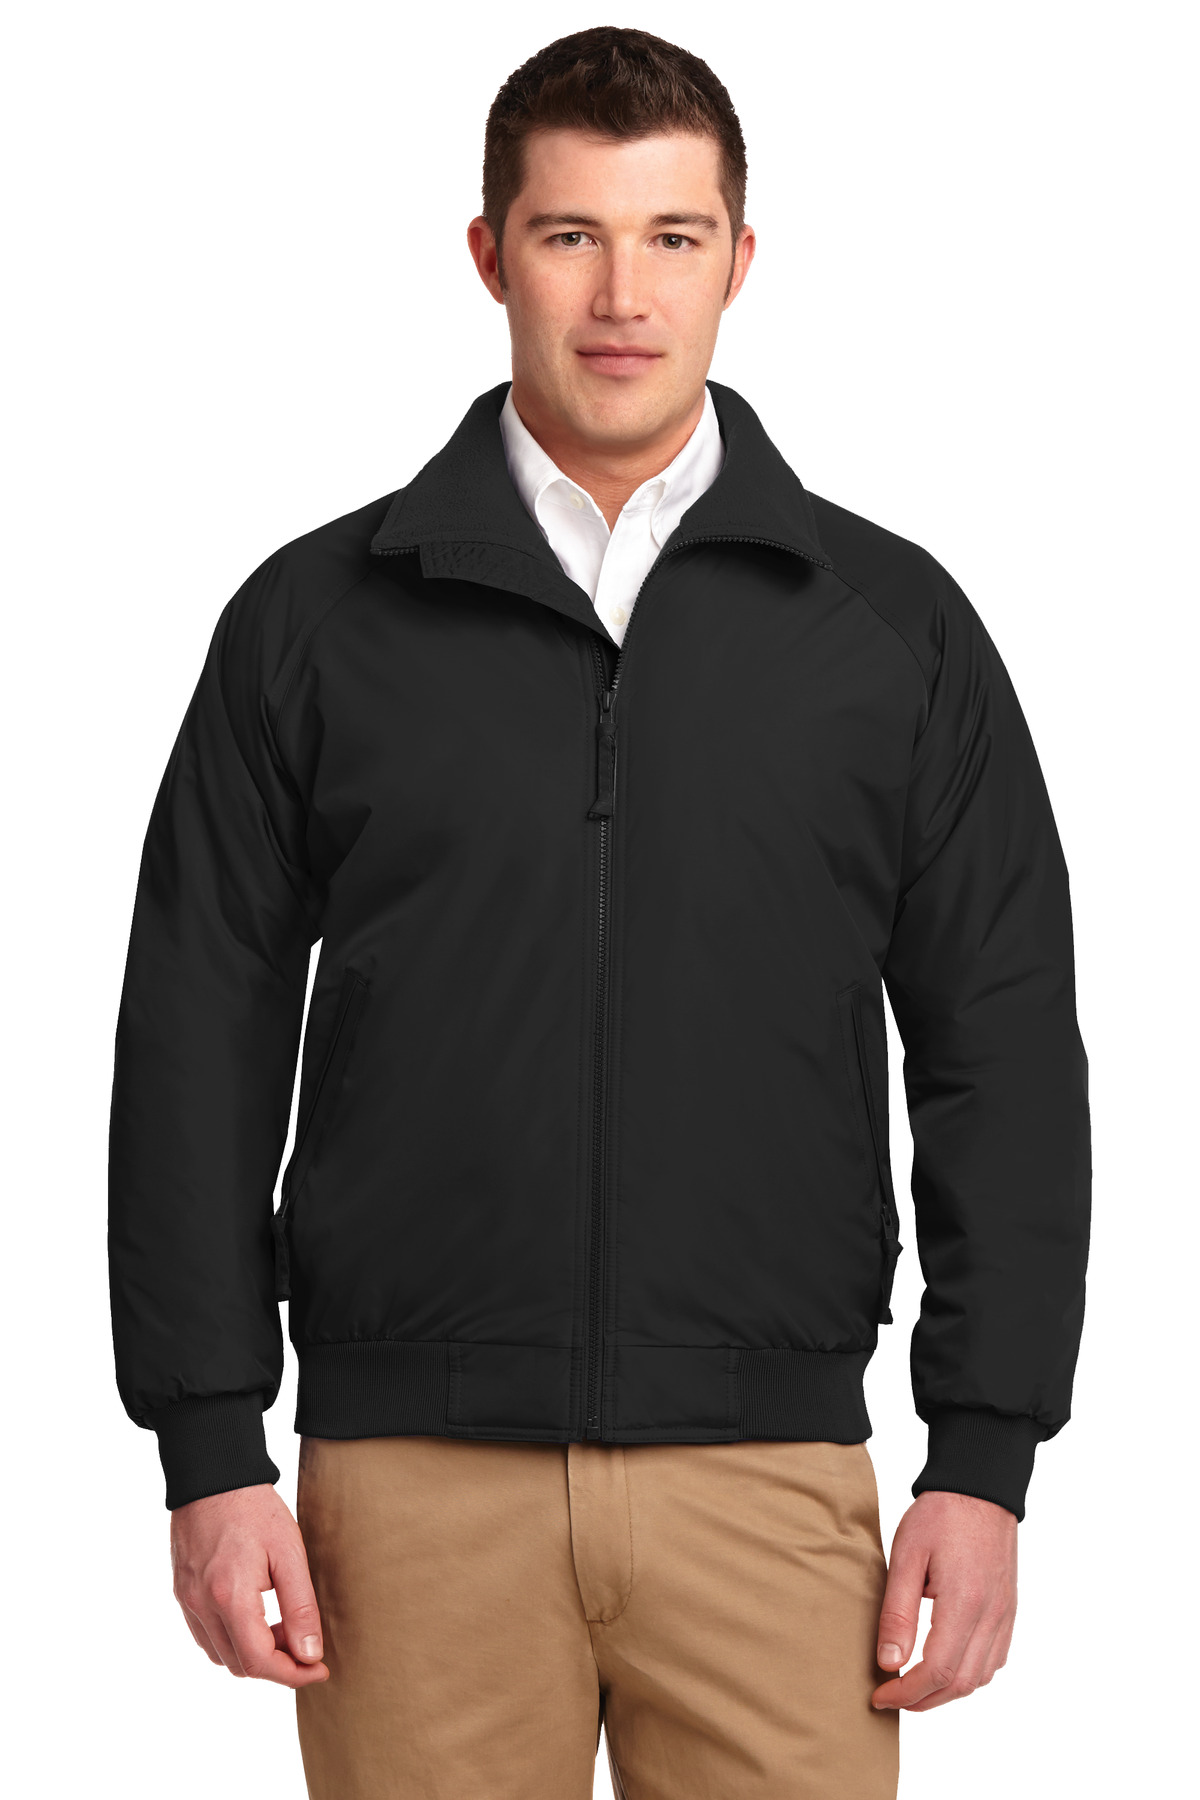 Port Authority Tall Challenger Jacket-Port Authority